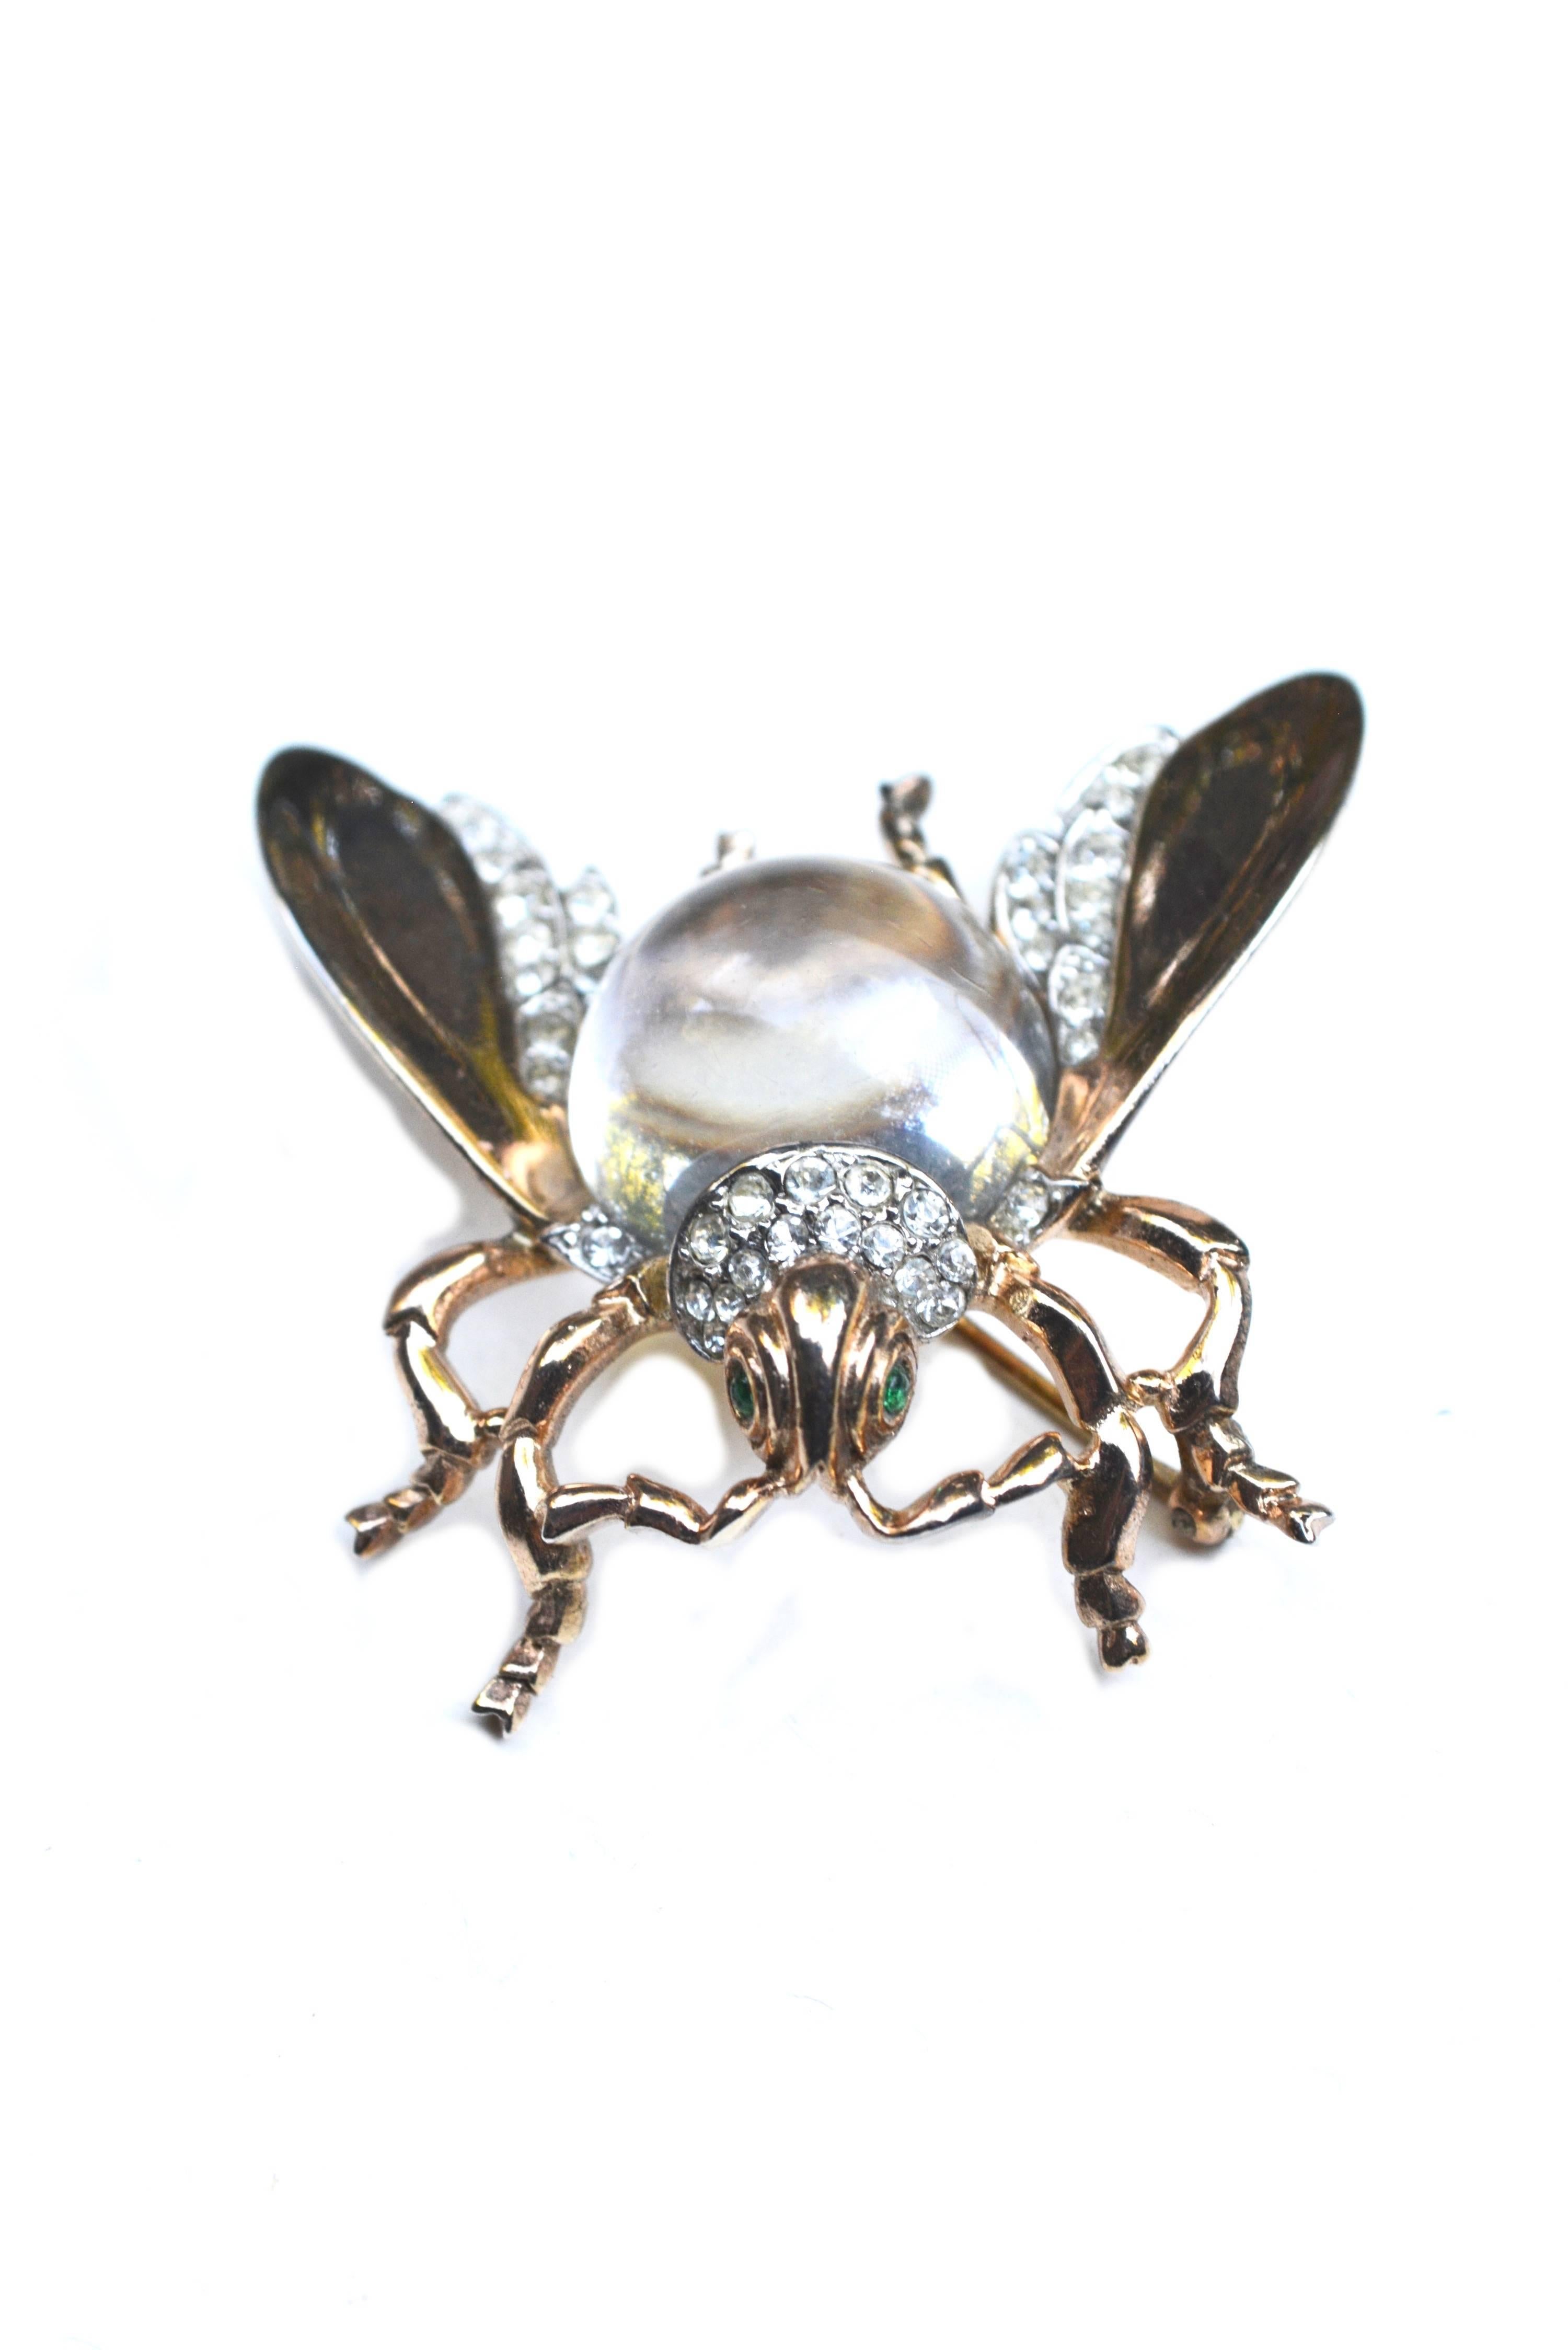 This larger size jelly belly fly or bee insect brooch by Trifari is whimsical and rarer. Clear center and paste stones on vermeil. Some mild finish loss on the end of one wing, a couple slightly darker tarnished spots on the other end.  About